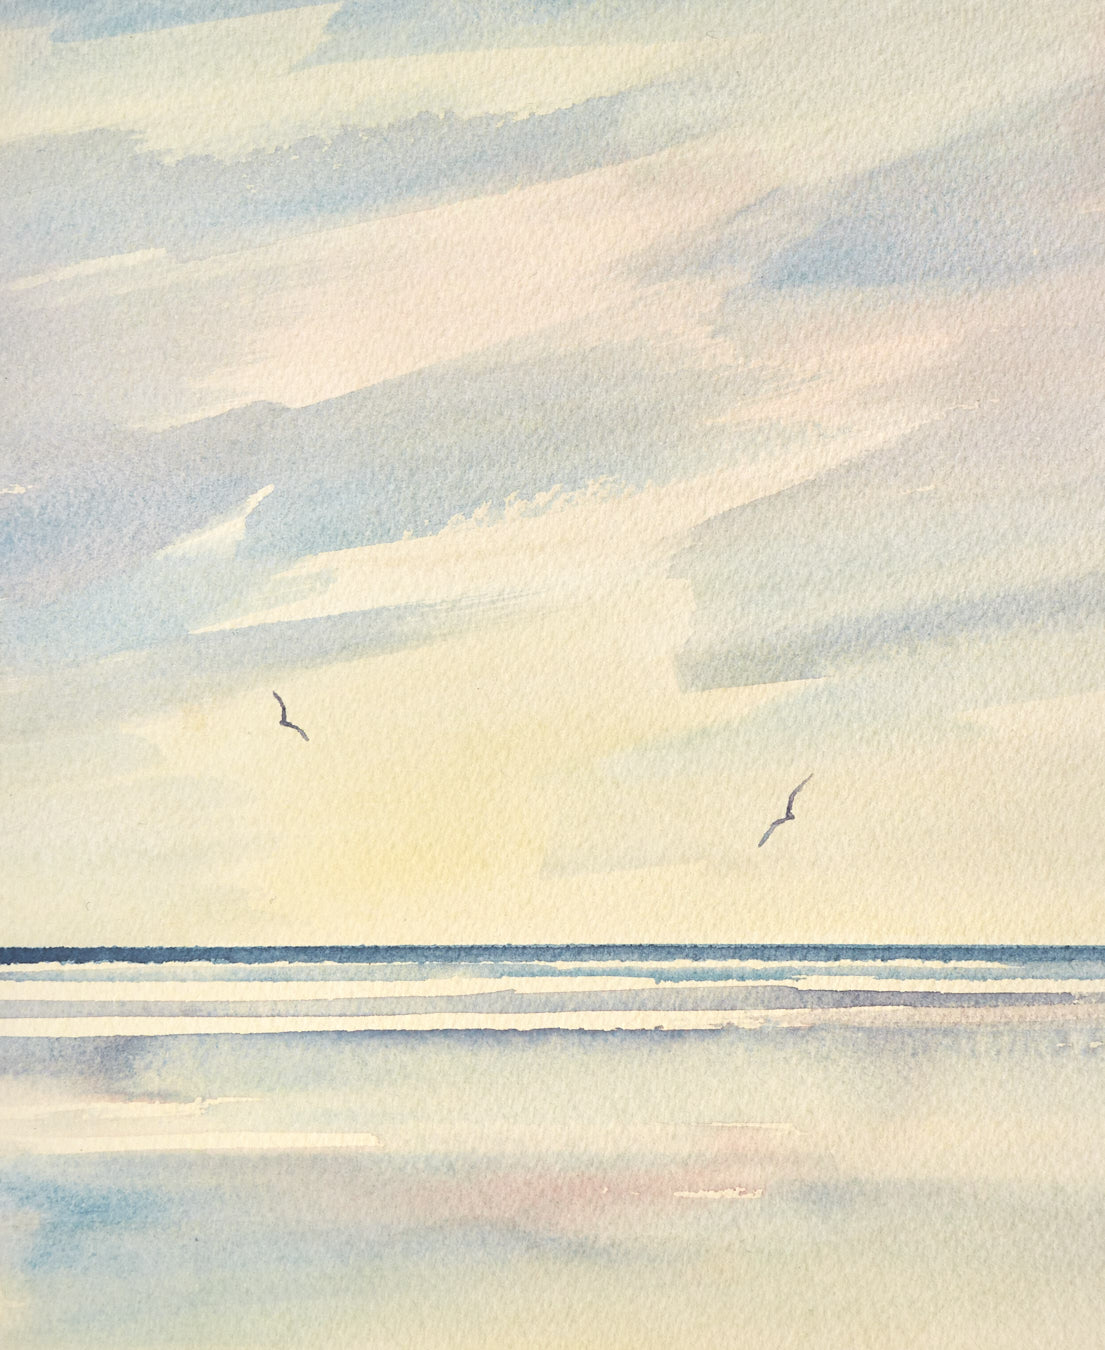 Large image of Sunset tide, St Annes-on-sea original watercolour painting by Timothy Gent